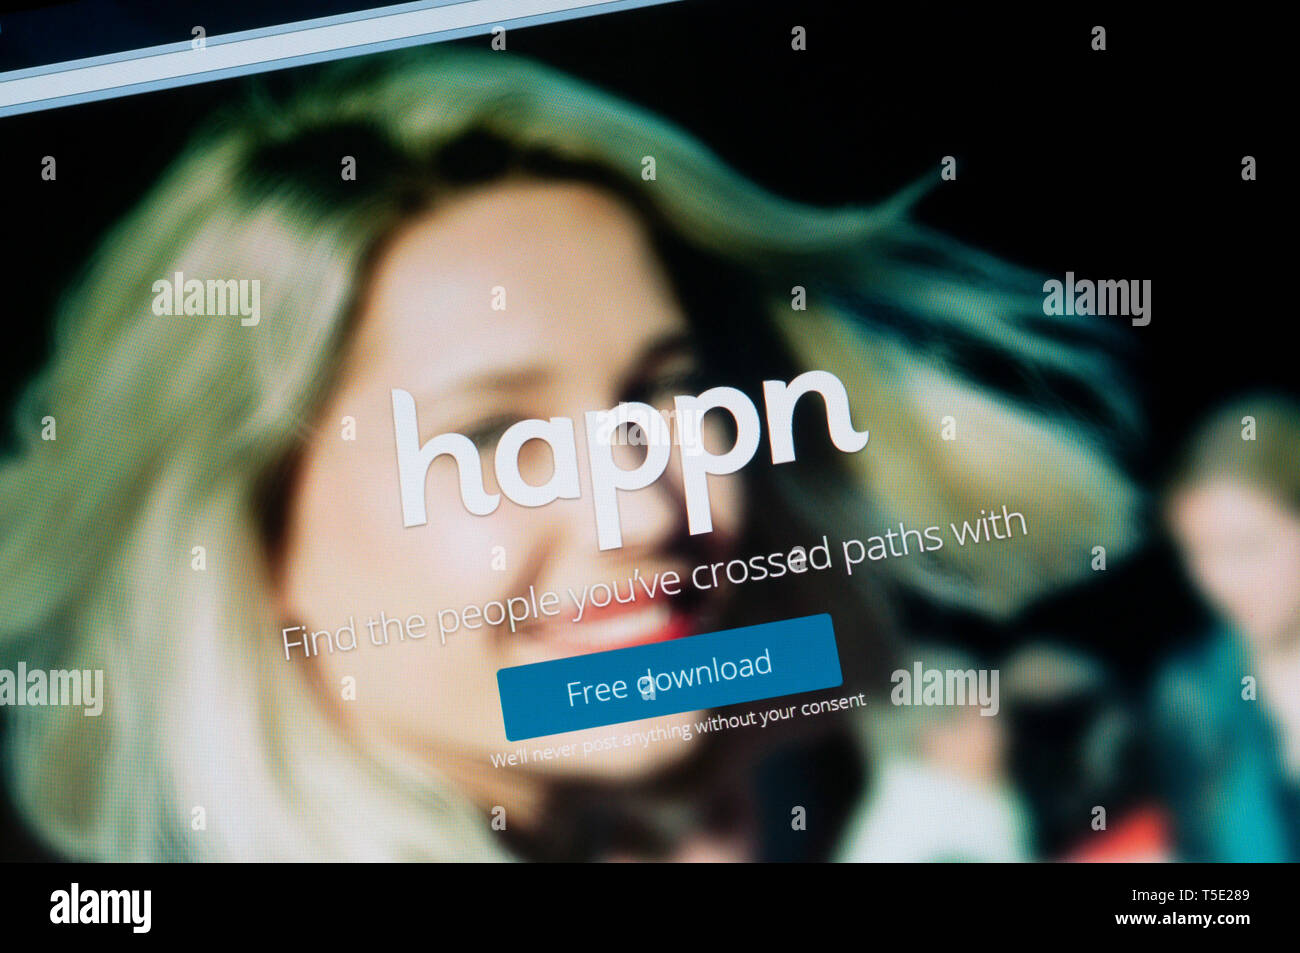 Home page of the Happn social network app website. Stock Photo